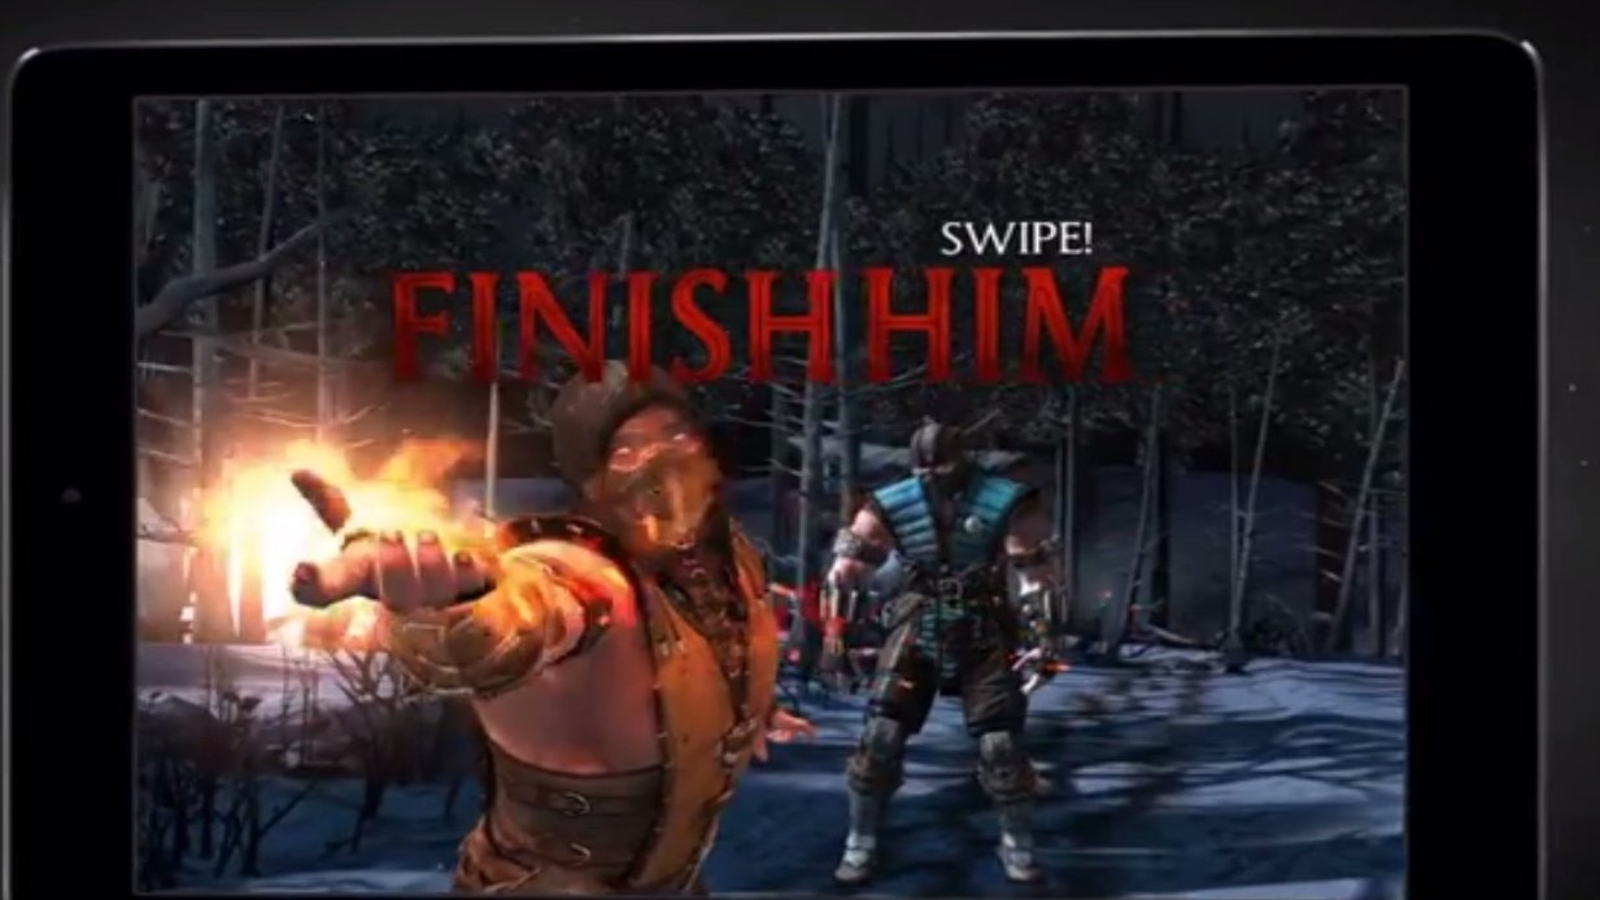 Mortal Kombat X Mobile Game Now Available On Android Devices